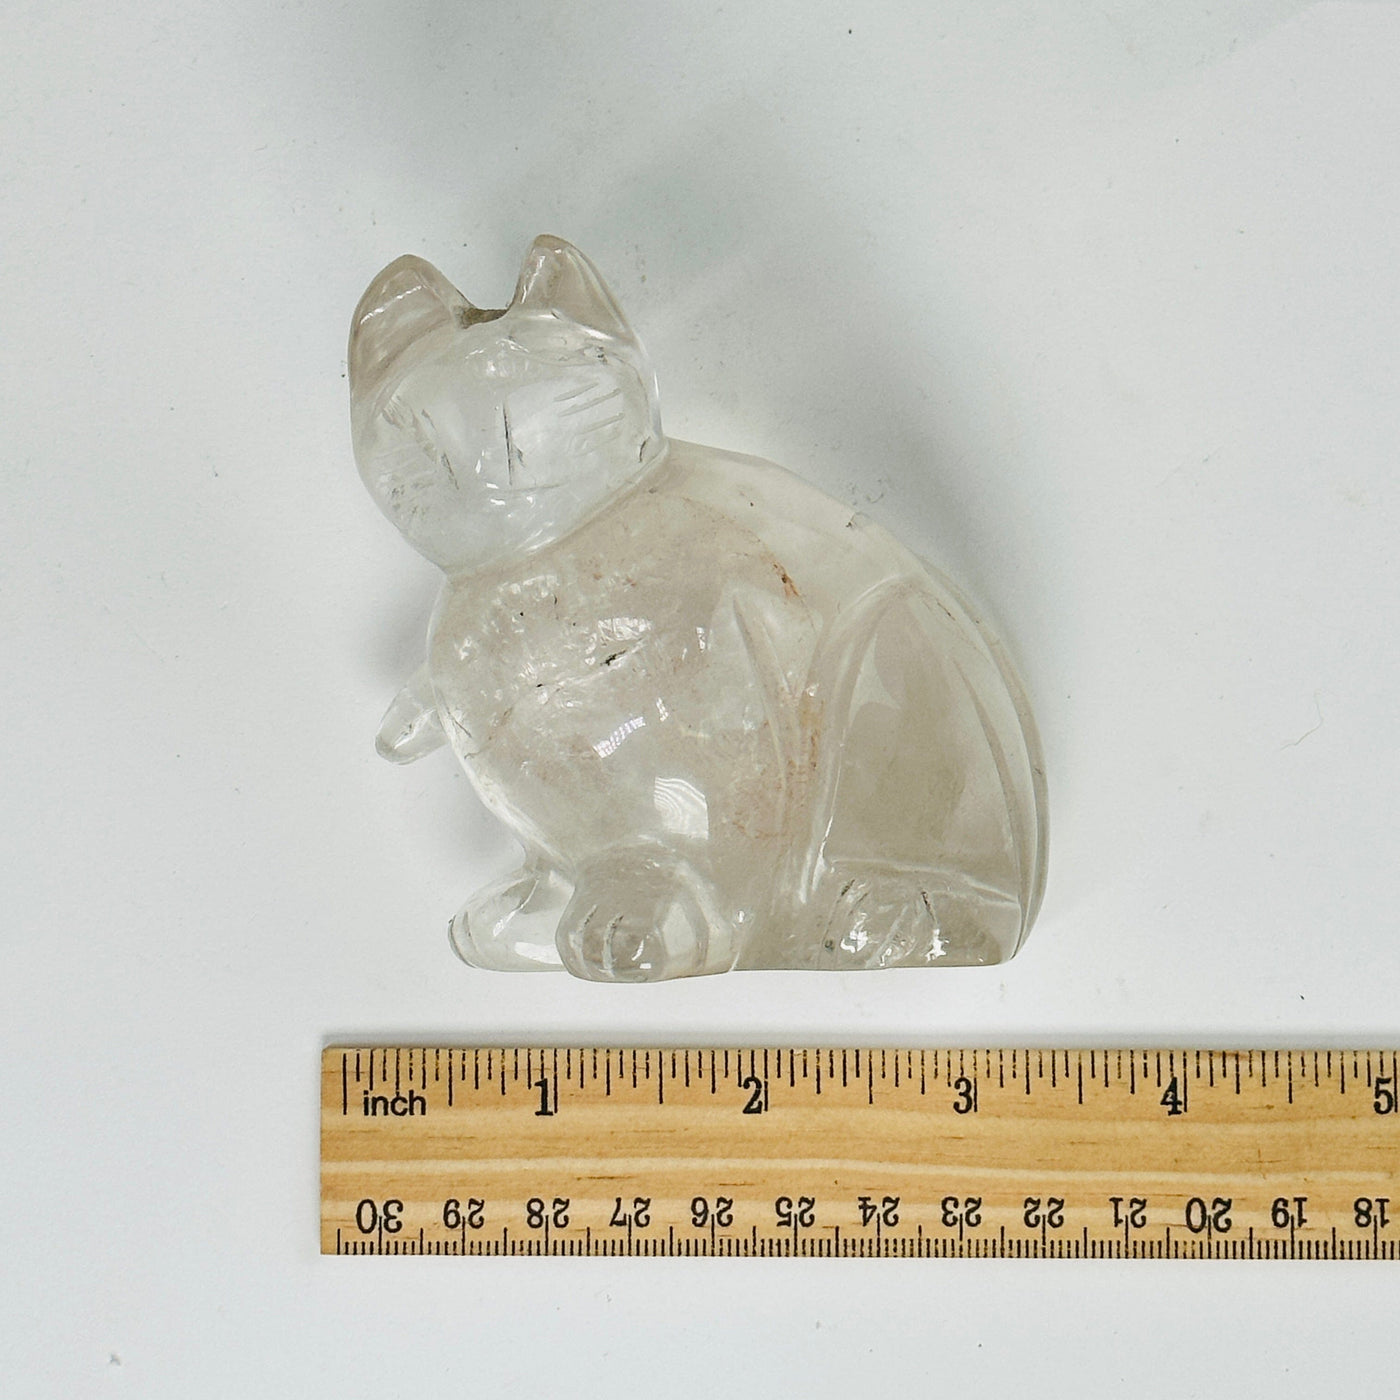 crystal quartz cat statue next to a ruler for size reference